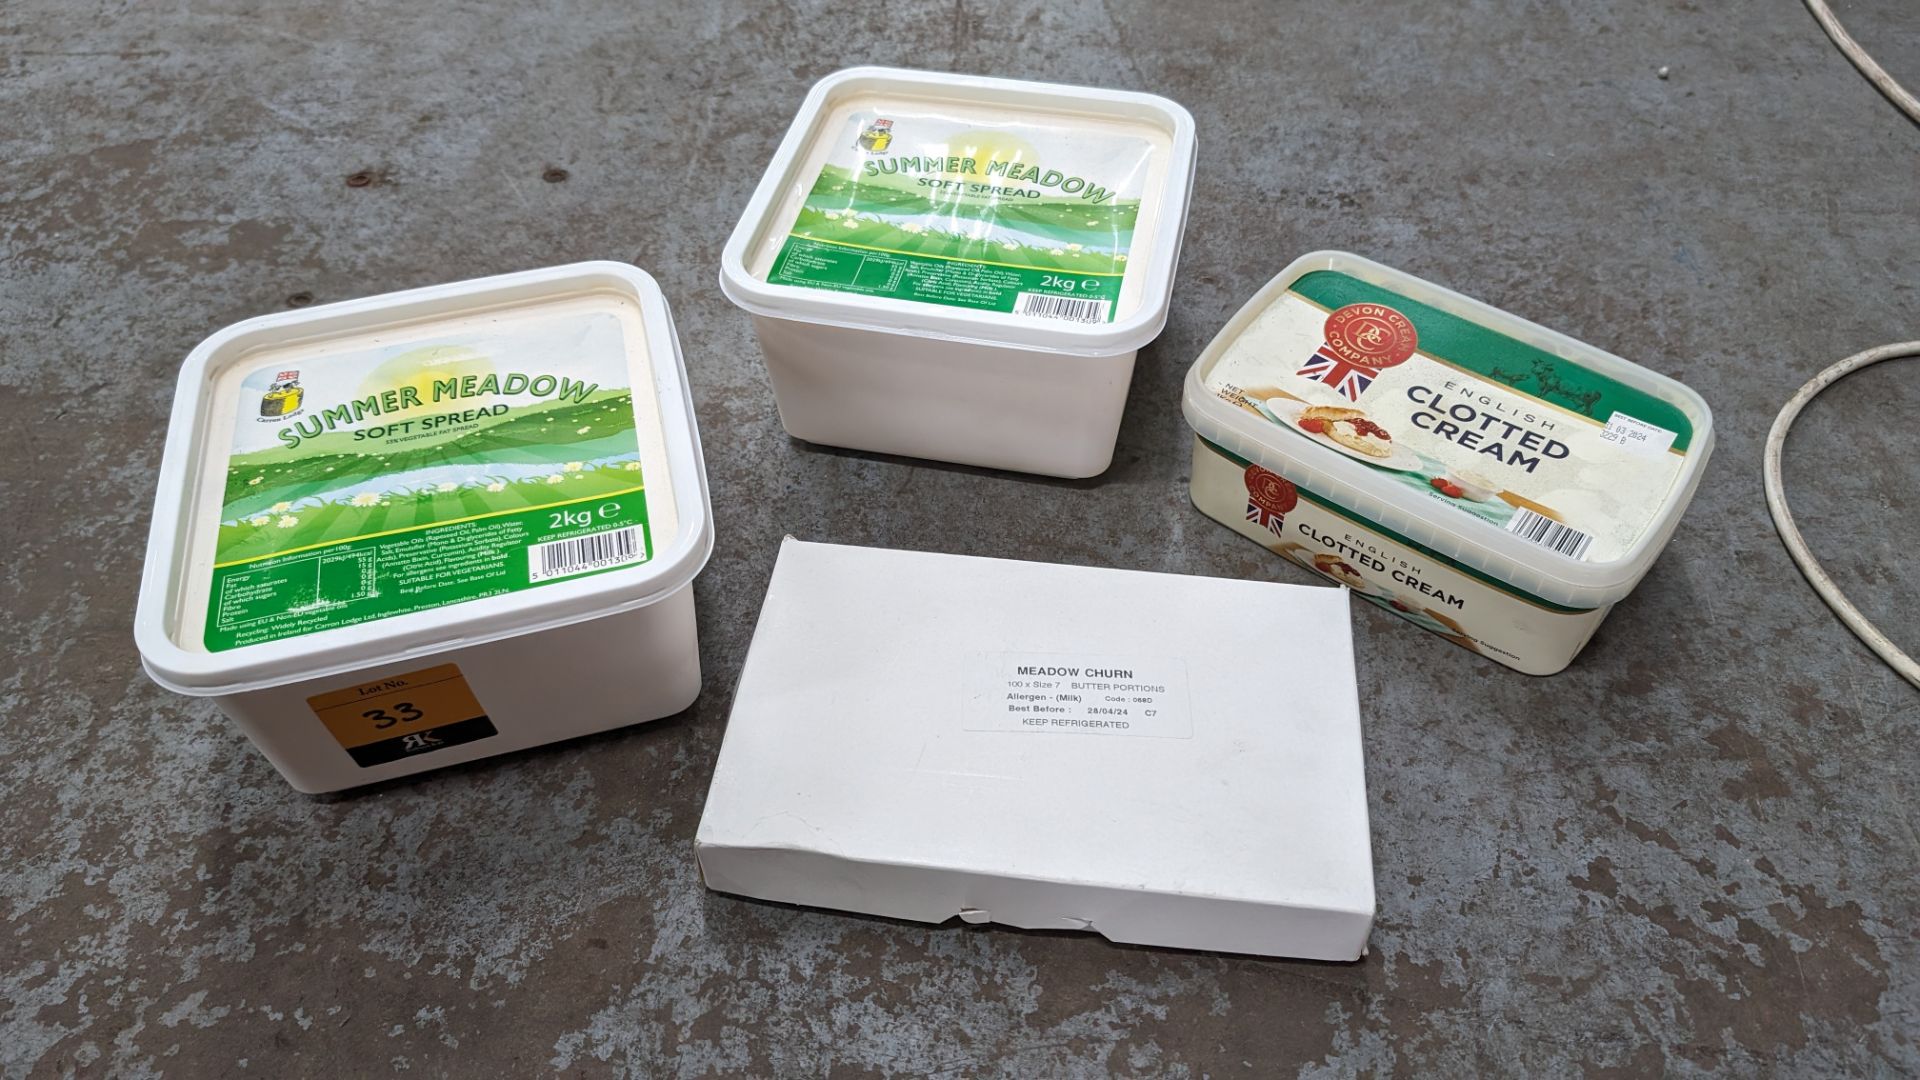 2 off 2kg tubs of Summer Meadow soft spread plus box of Meadow Churn individual packets of butter (1 - Image 2 of 6